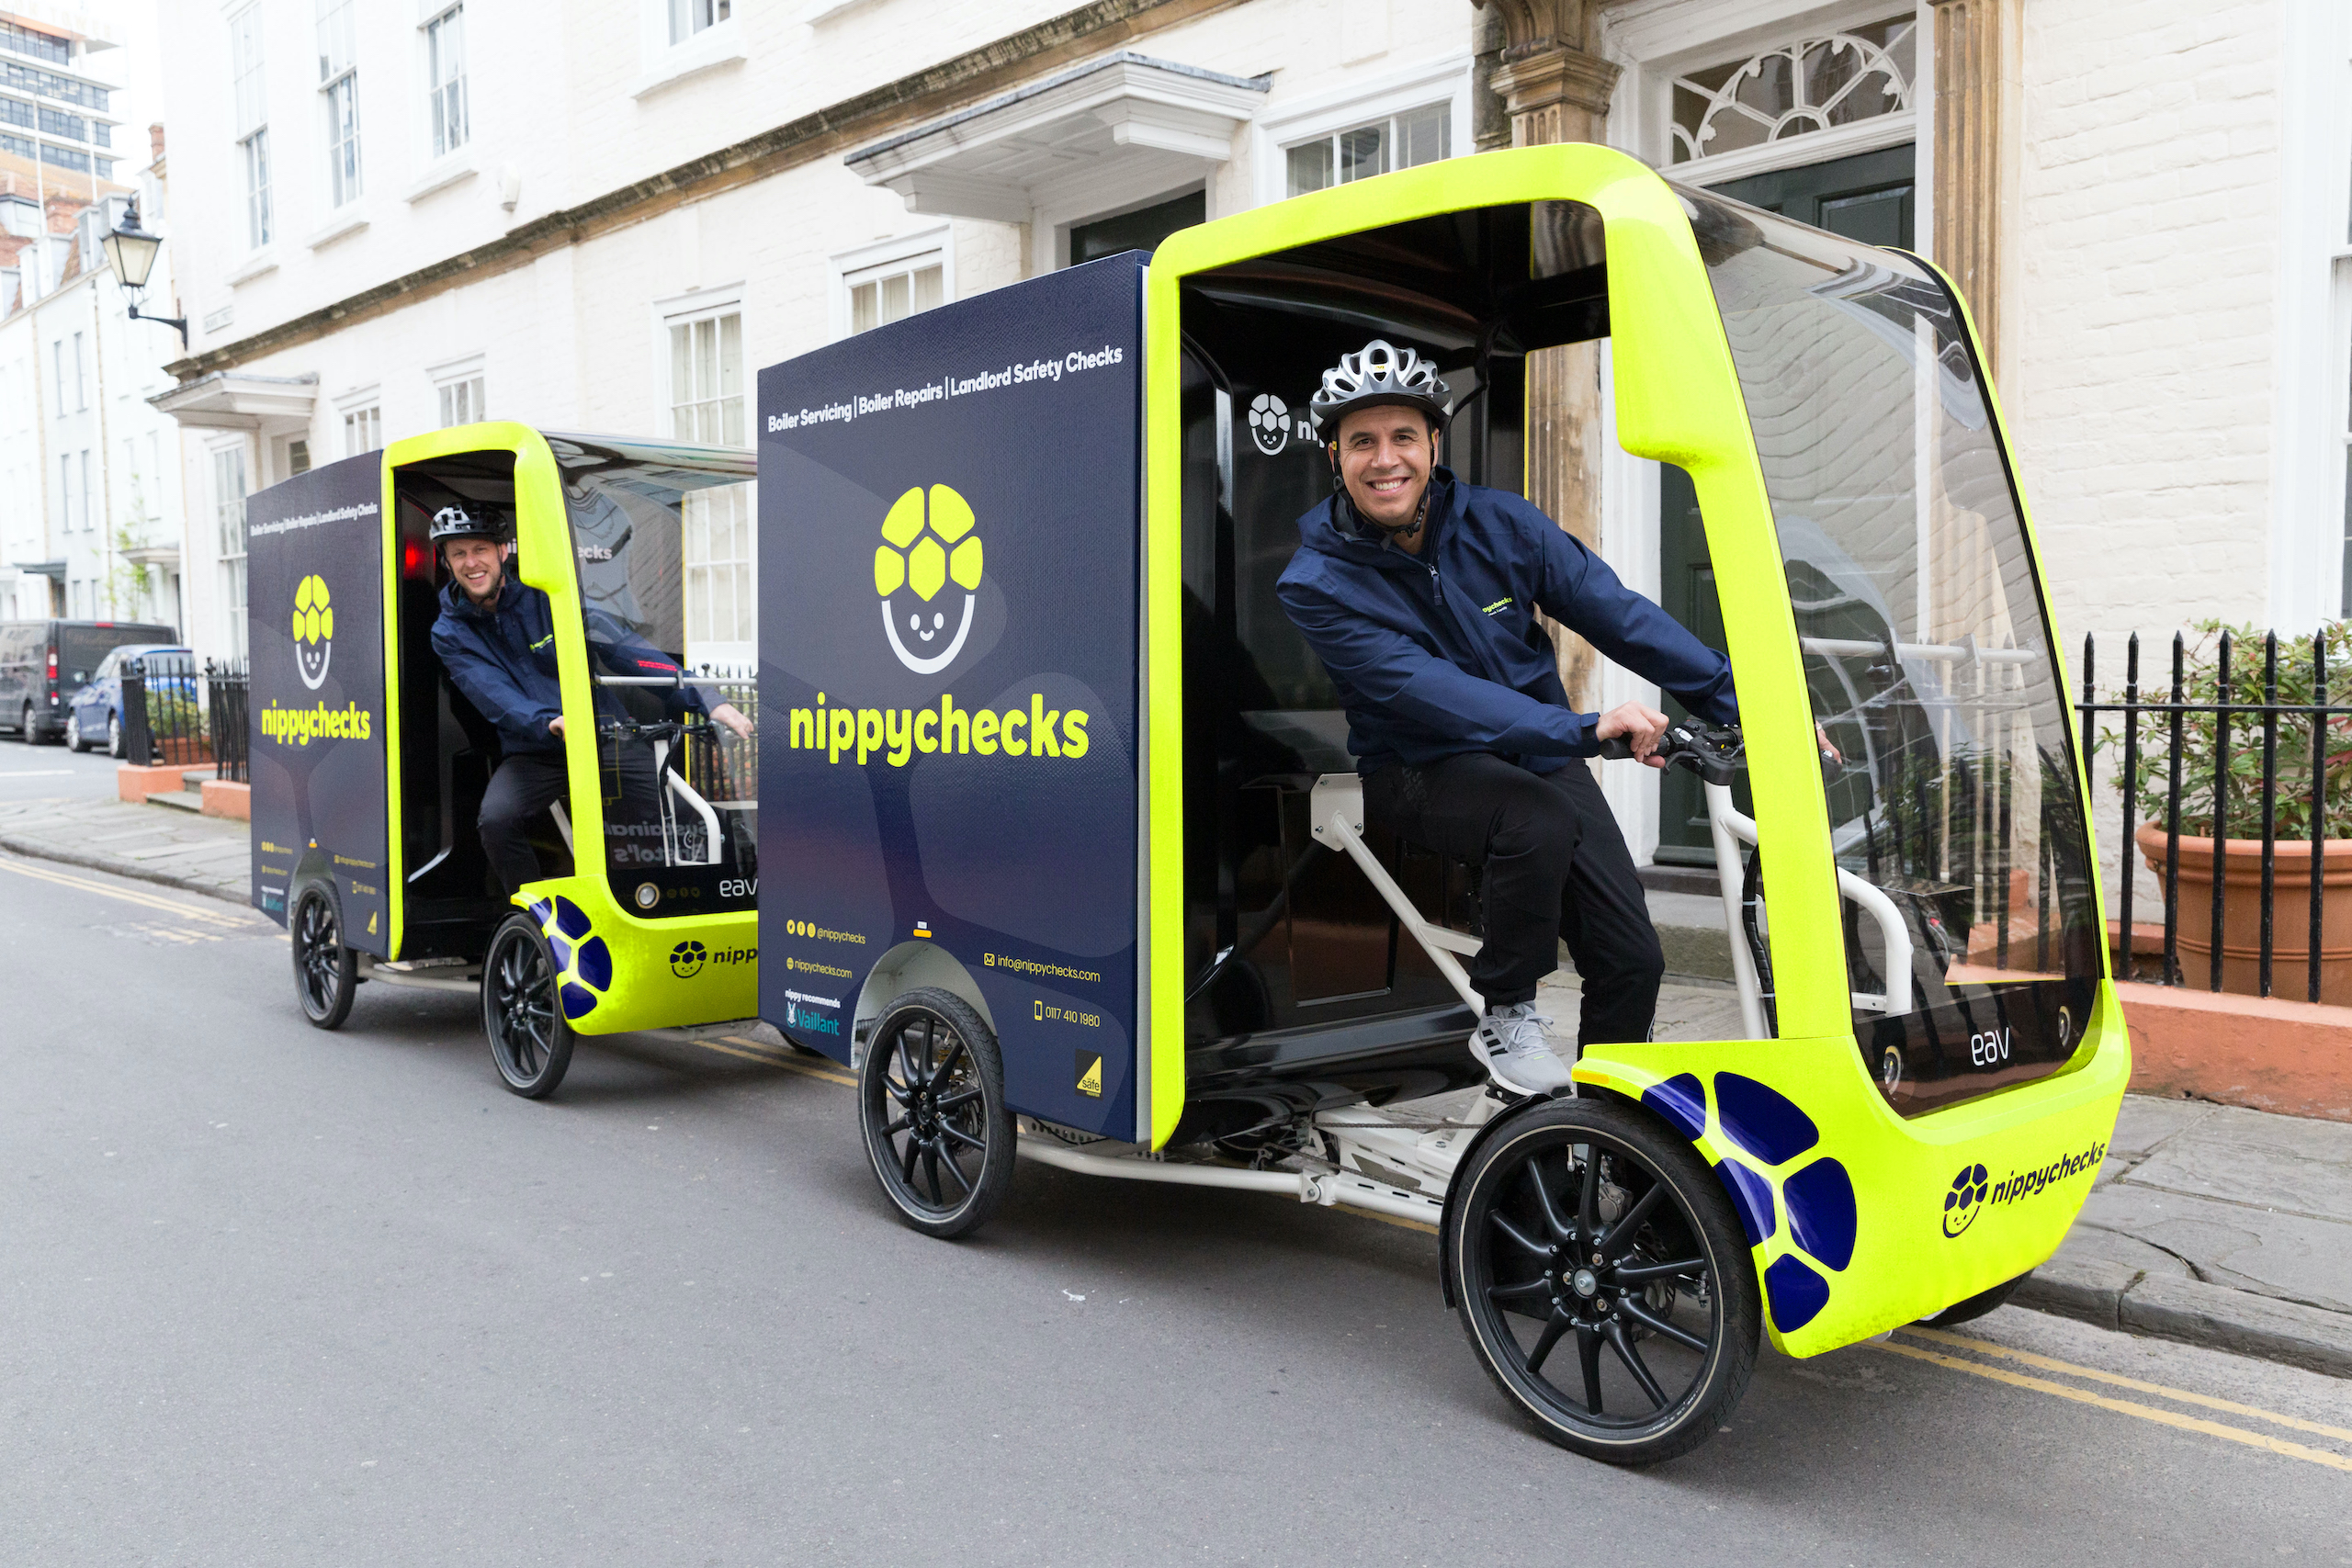 Plumbers on bikes hit the streets of Bristol as Nippychecks launches